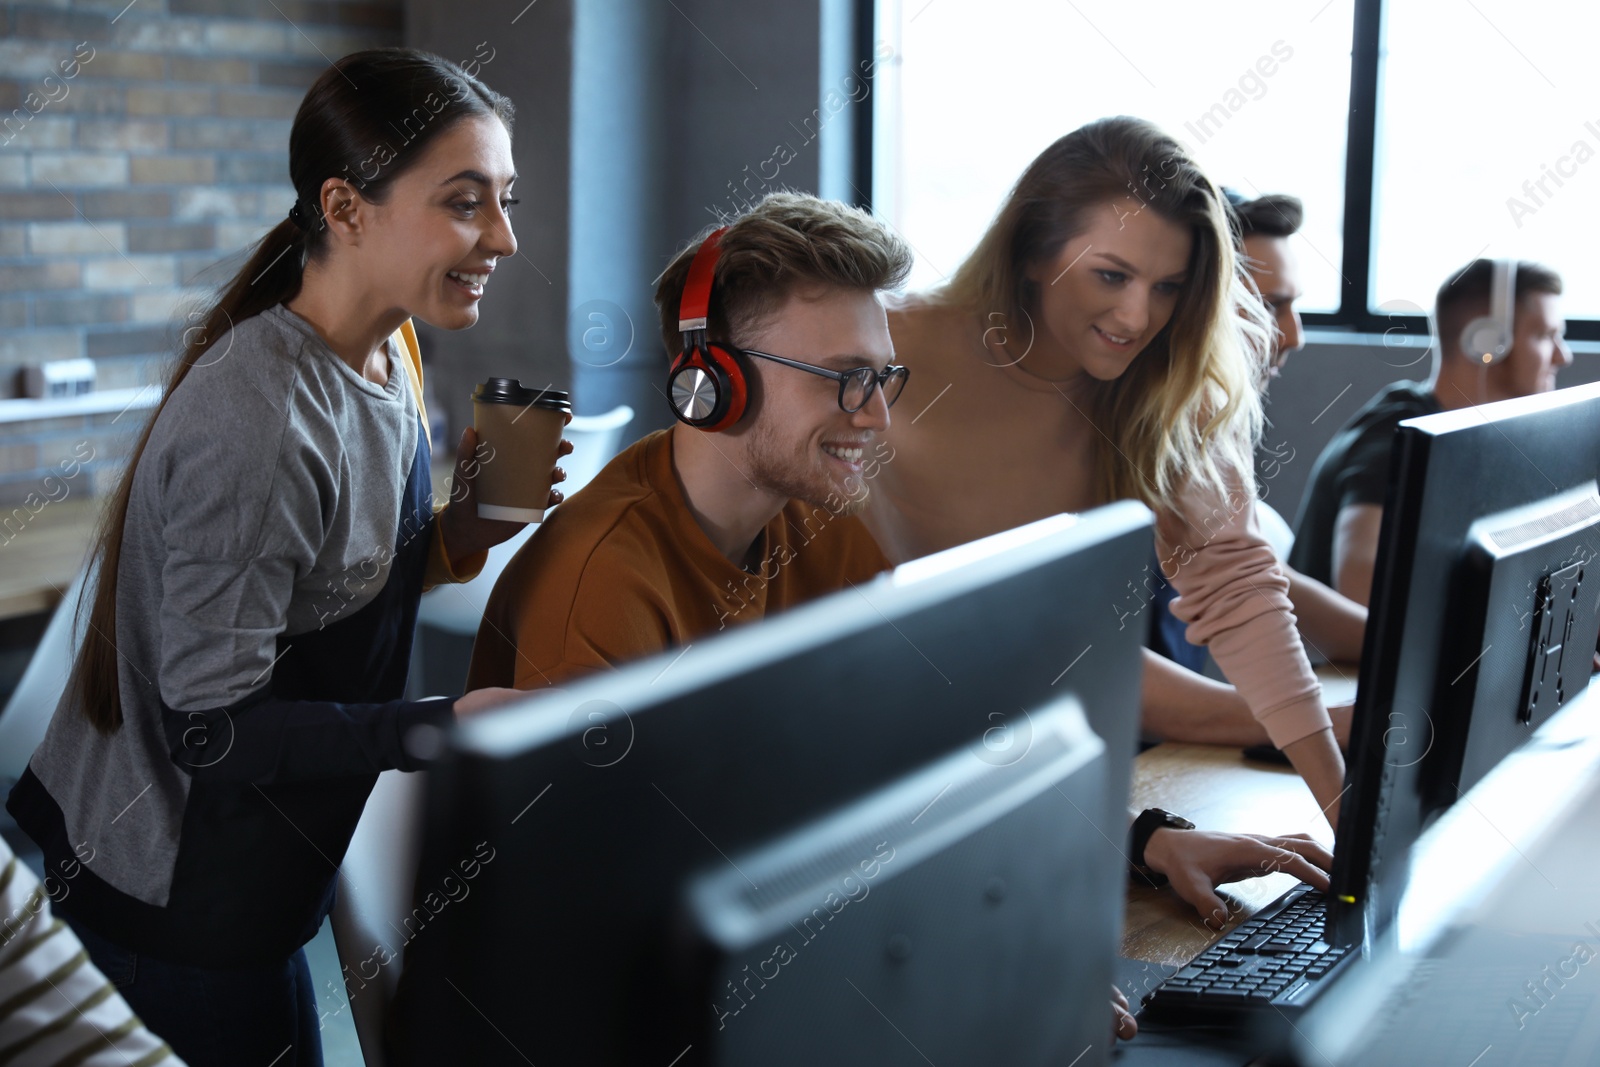 Photo of Group of people playing video games in internet cafe